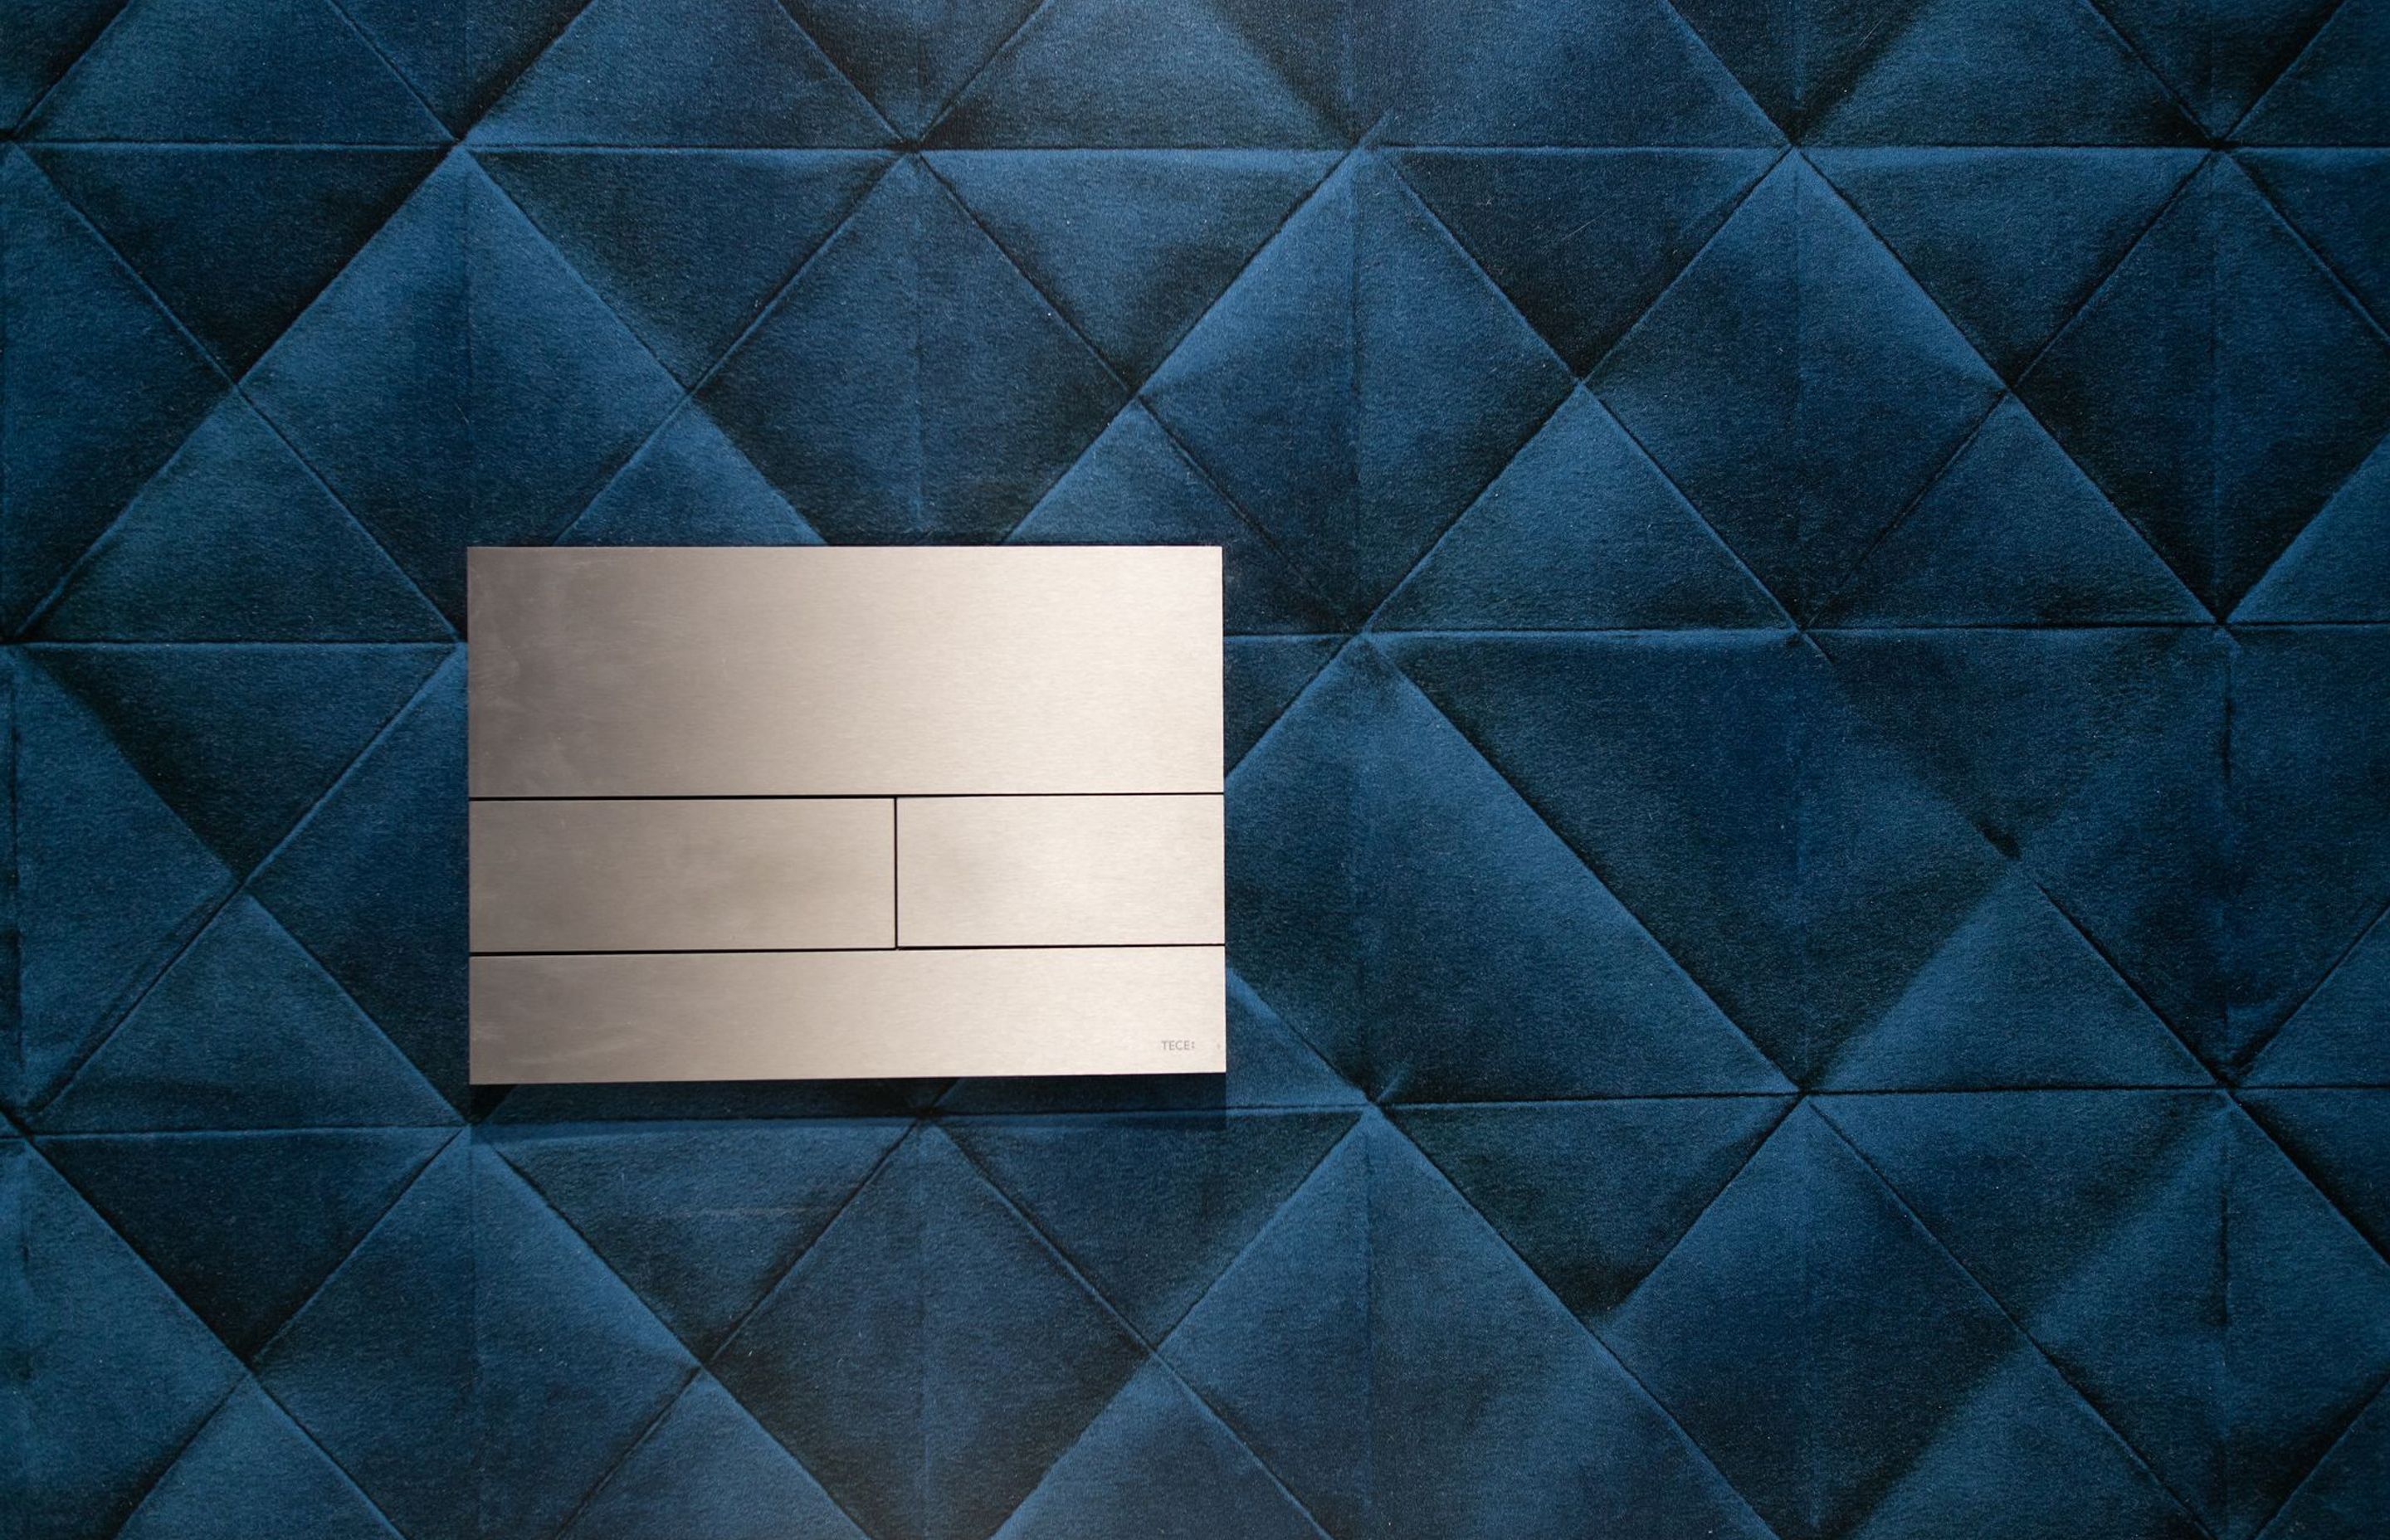 The statement wallpaper adds a further layer of plush elegance with its quilted velvet appearance.